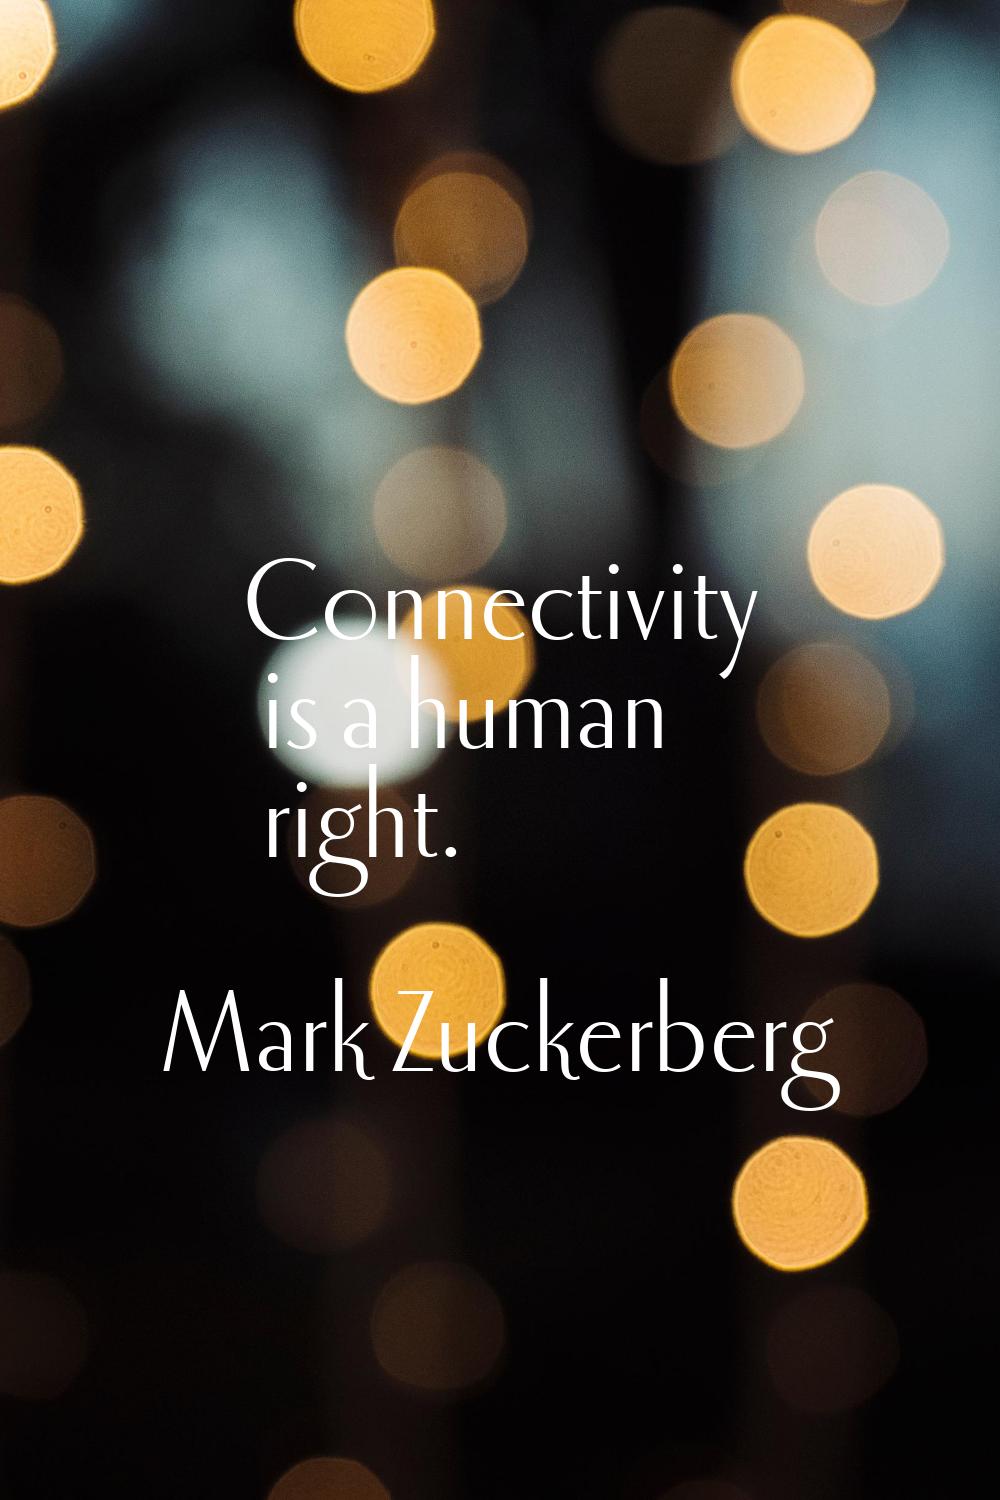 Connectivity is a human right.